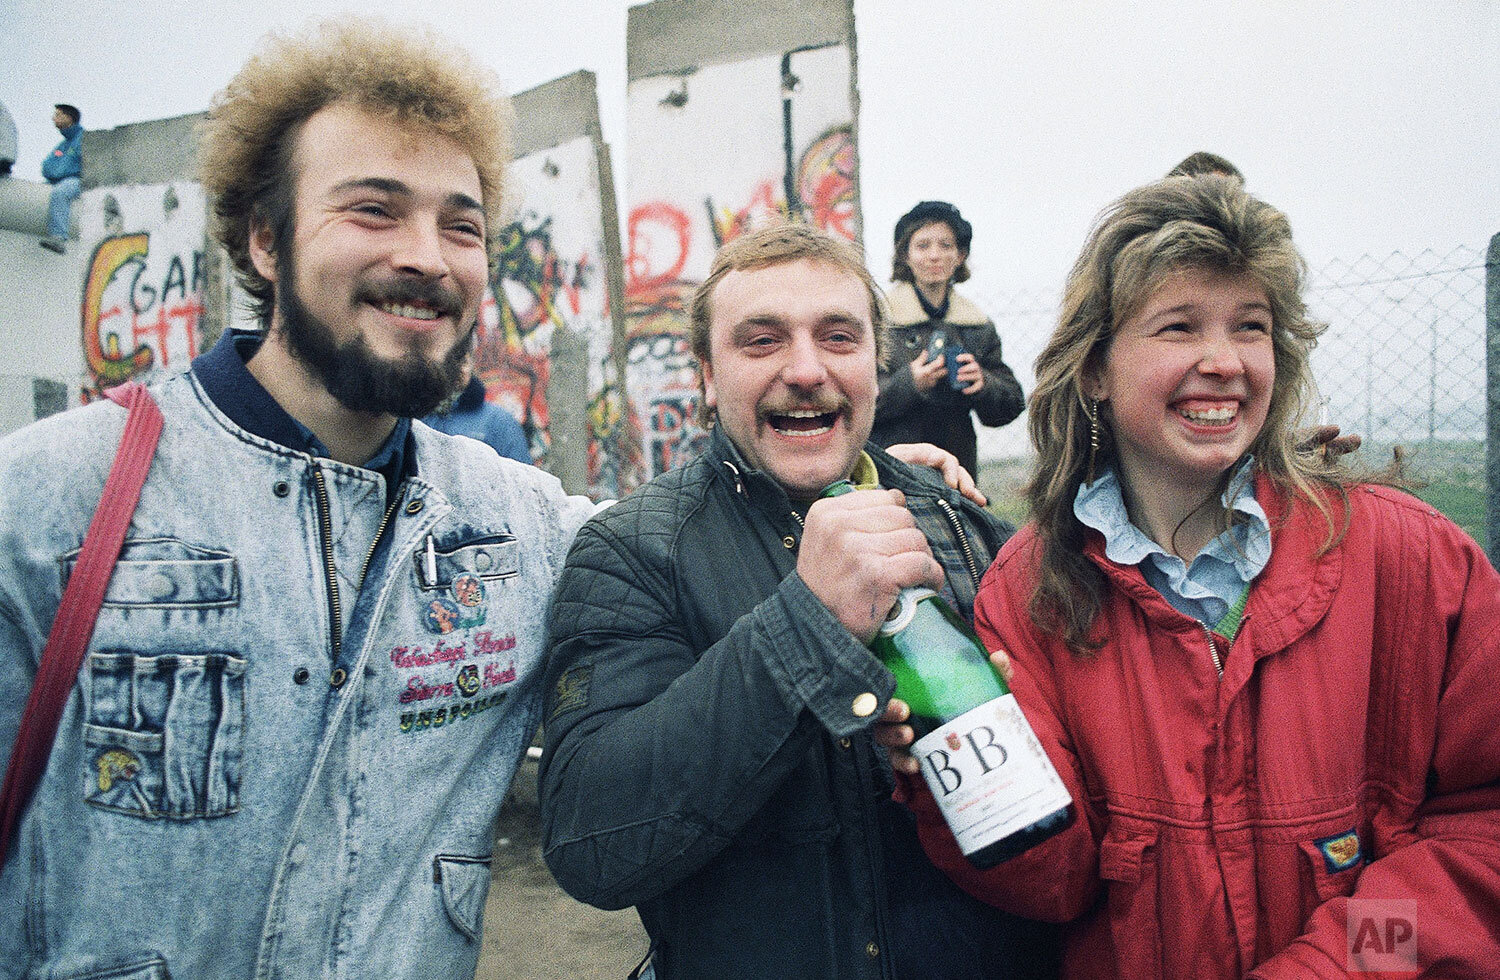  Bernd Mechelke of Ingolstadt, West Germany, welcomes his friends from Woltersdorf, East Germany with a bottle of champagne as they arrive in West Berlin, Nov. 12, 1989. (AP Photo/Thomas Kiezle) 